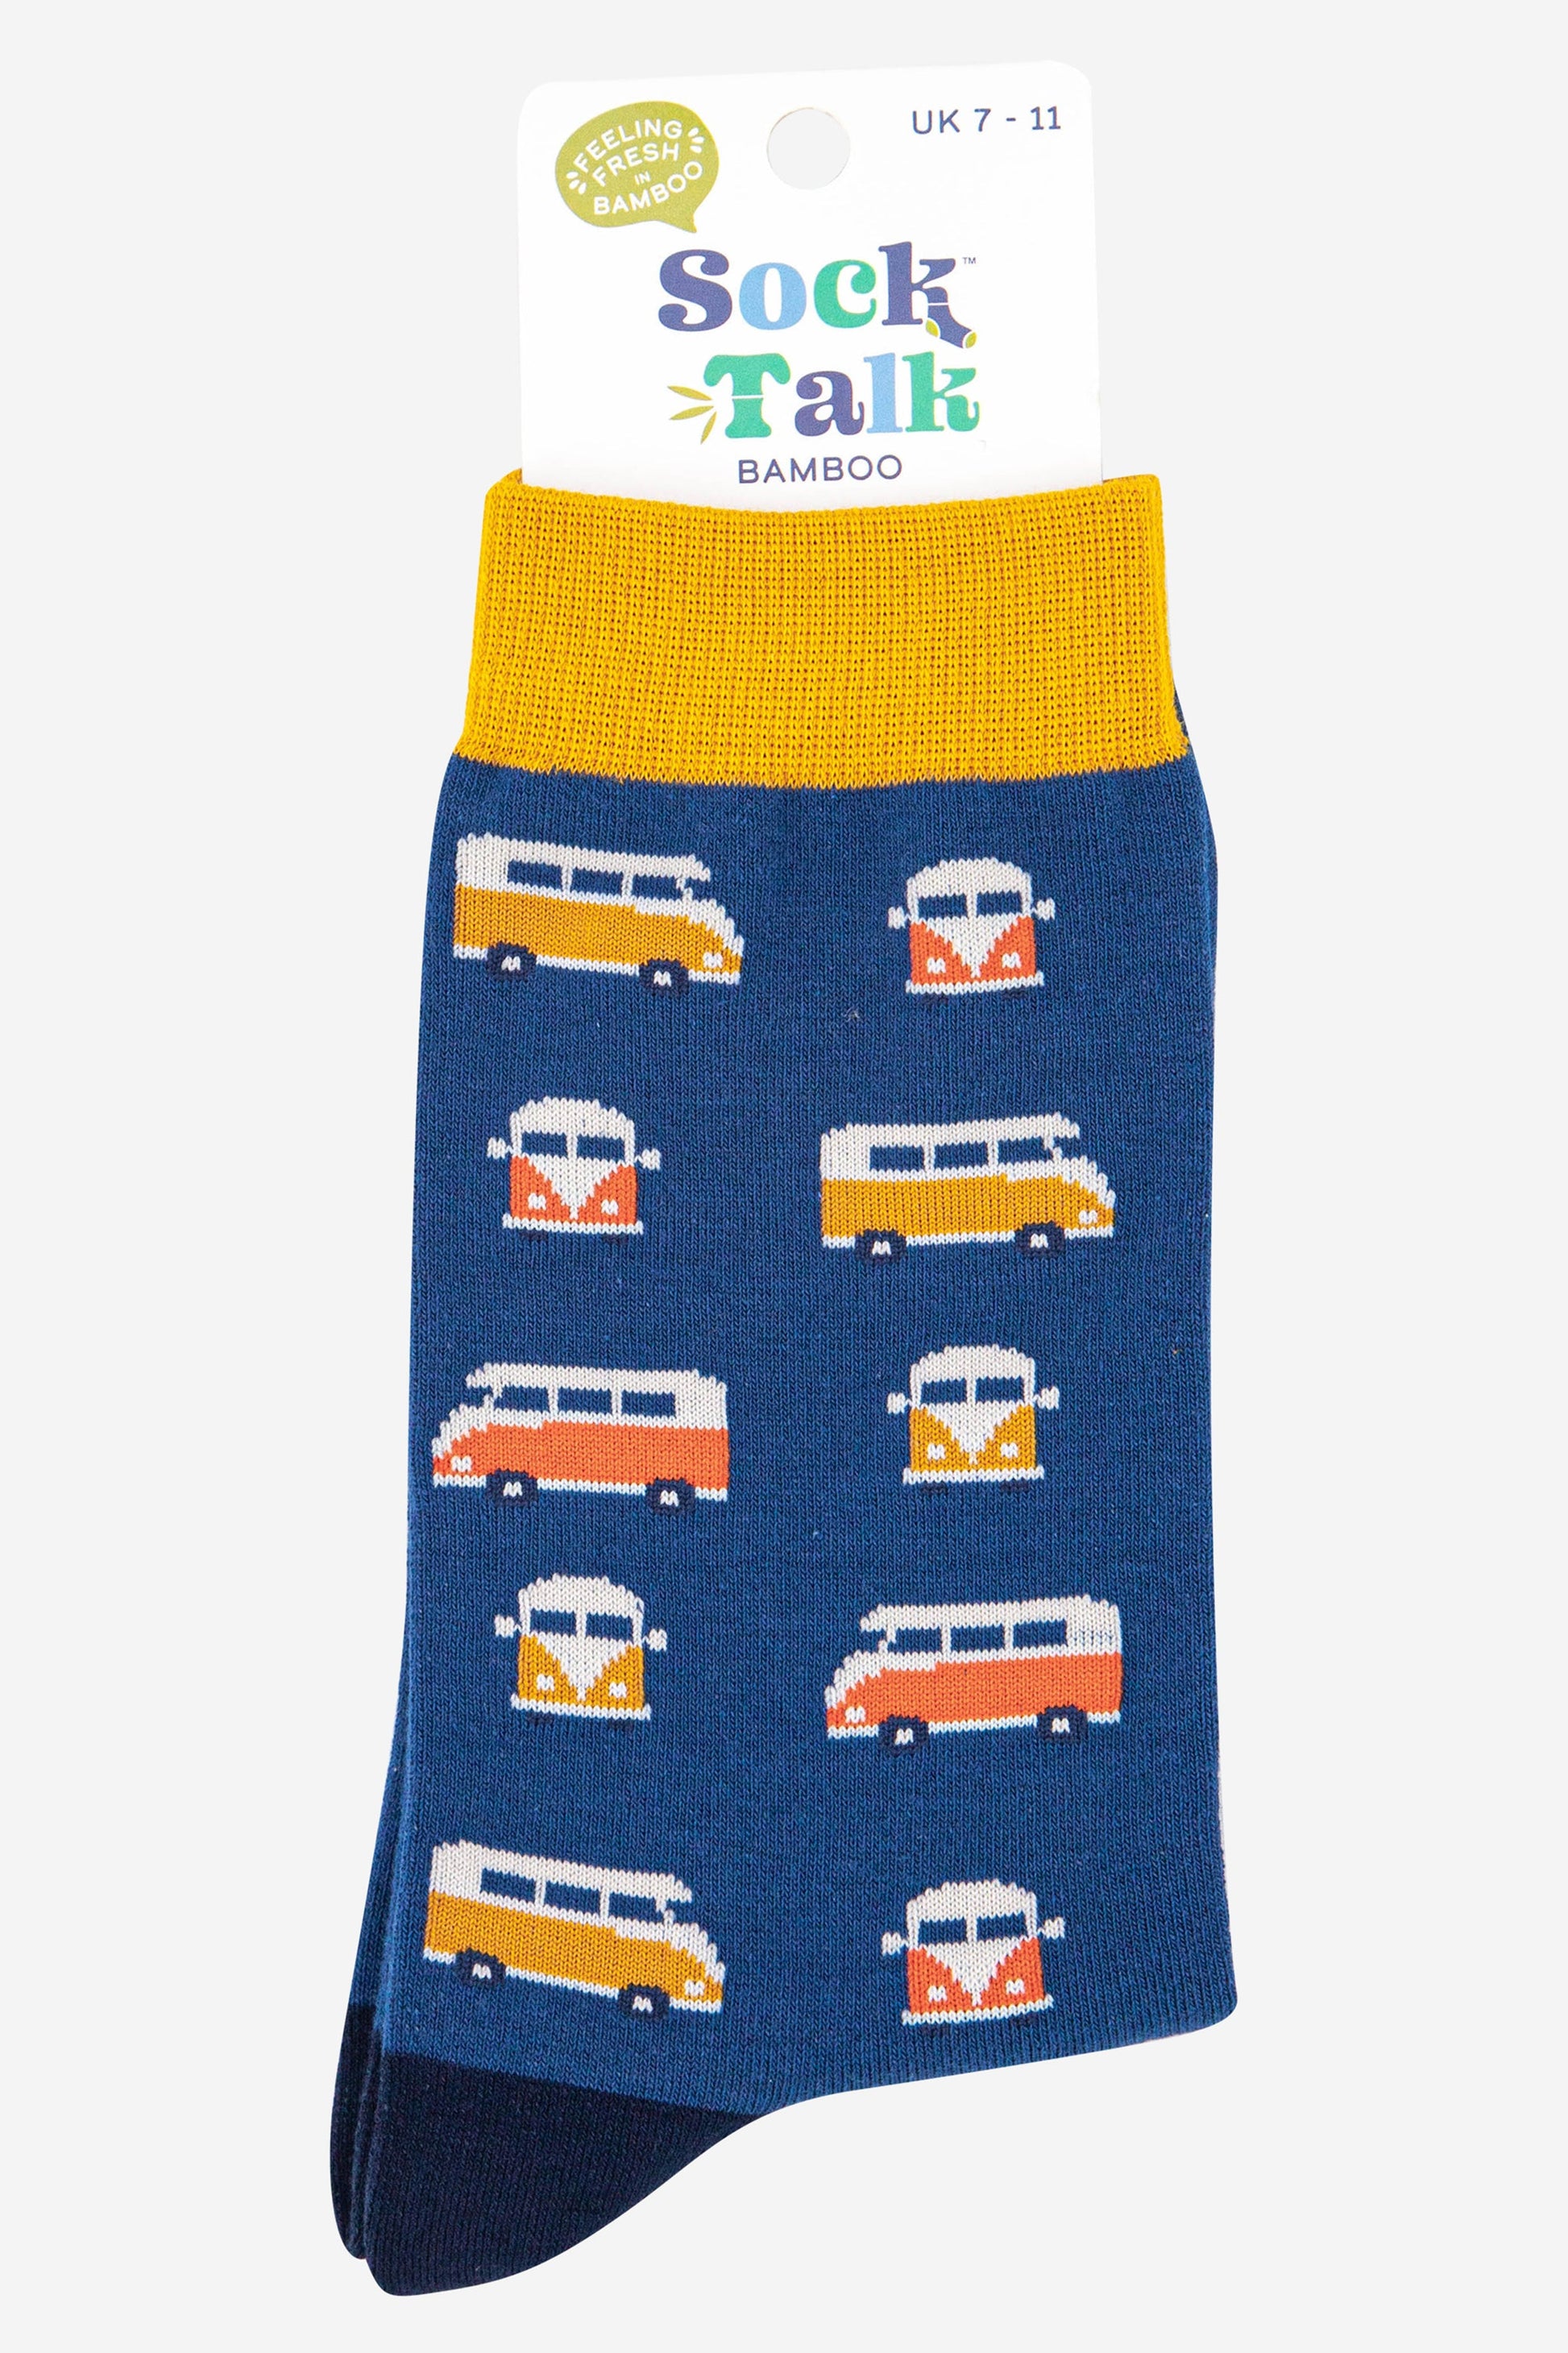 blue socks with a yellow cuff and an all over pattern featuring retro style campervans